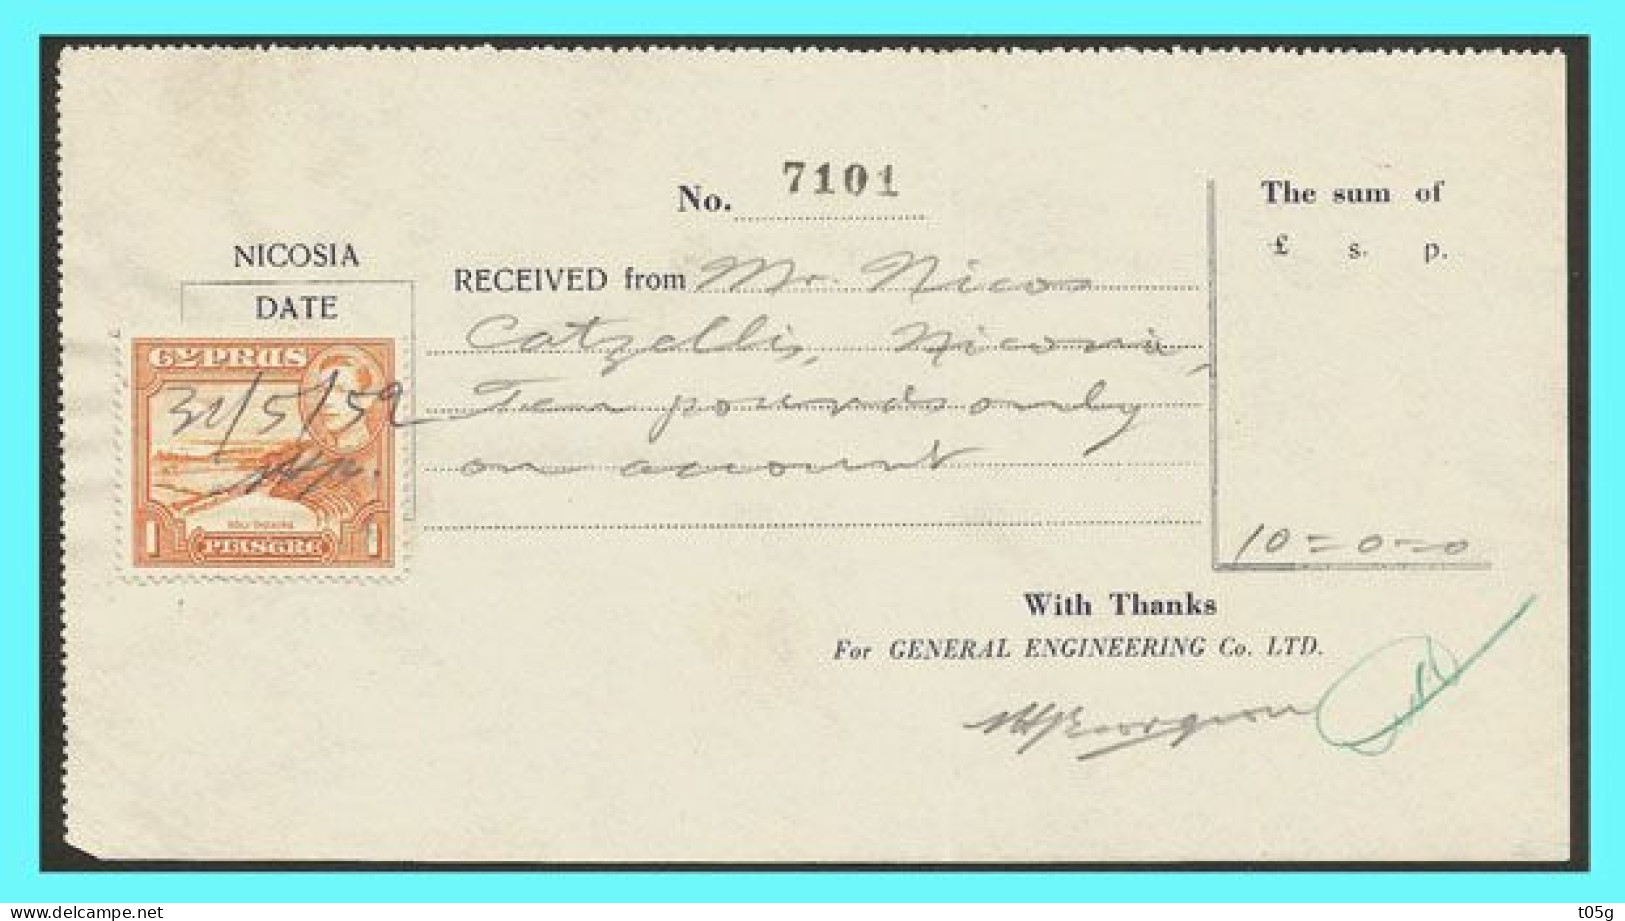 CYPRUS -GREECE-GRECE -EGEO: Proof With Stamp Used To Revenue Cyprus 31-7-1952 / - Covers & Documents